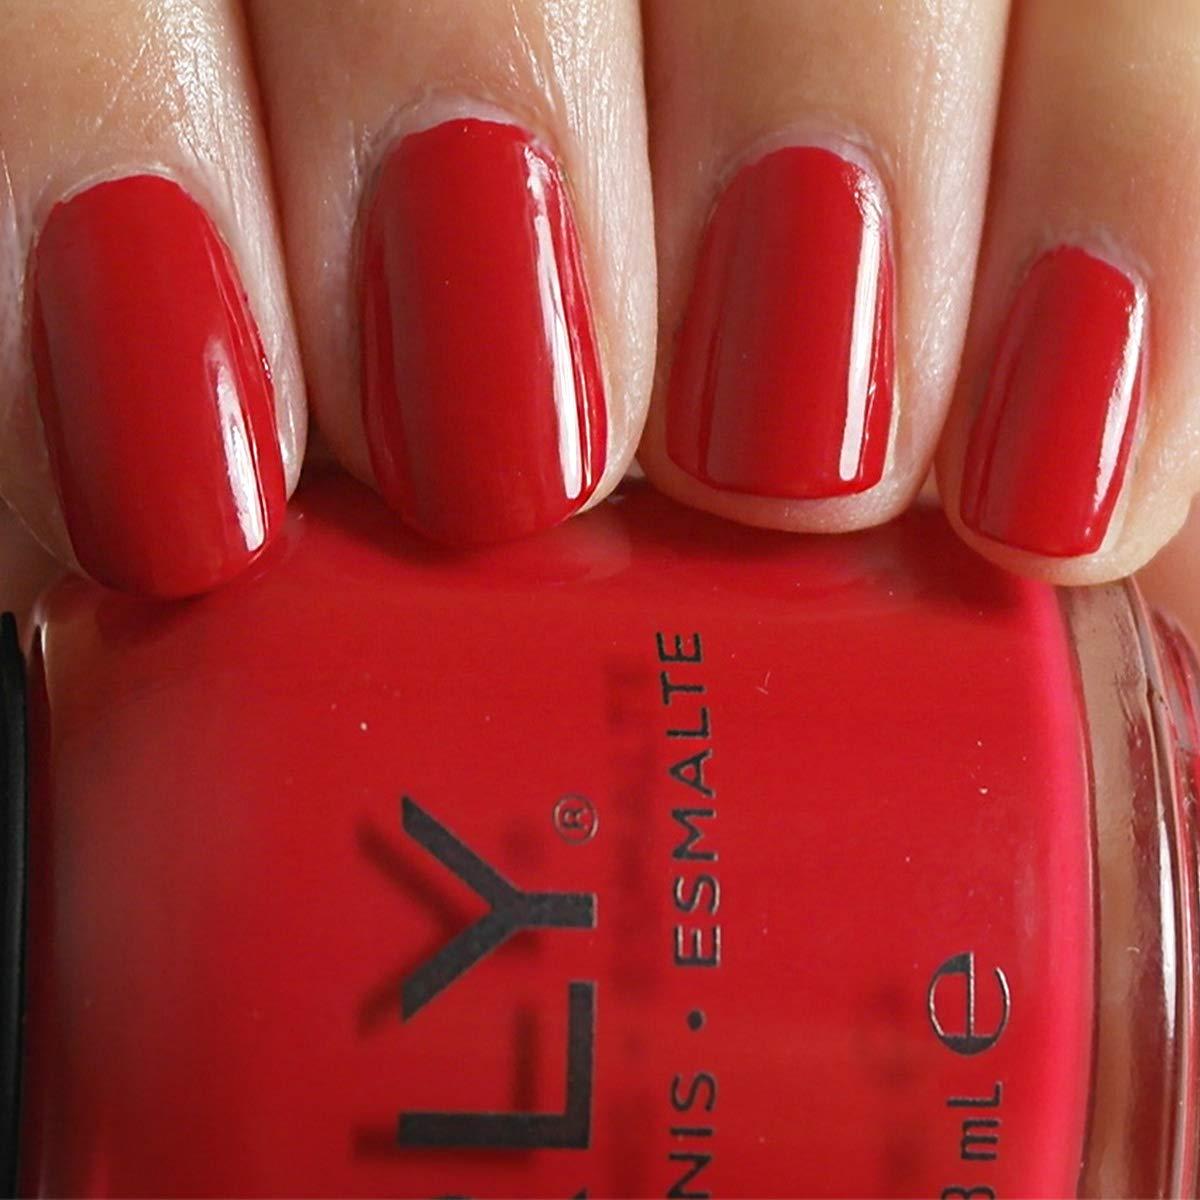 Haute Red — ORLY+